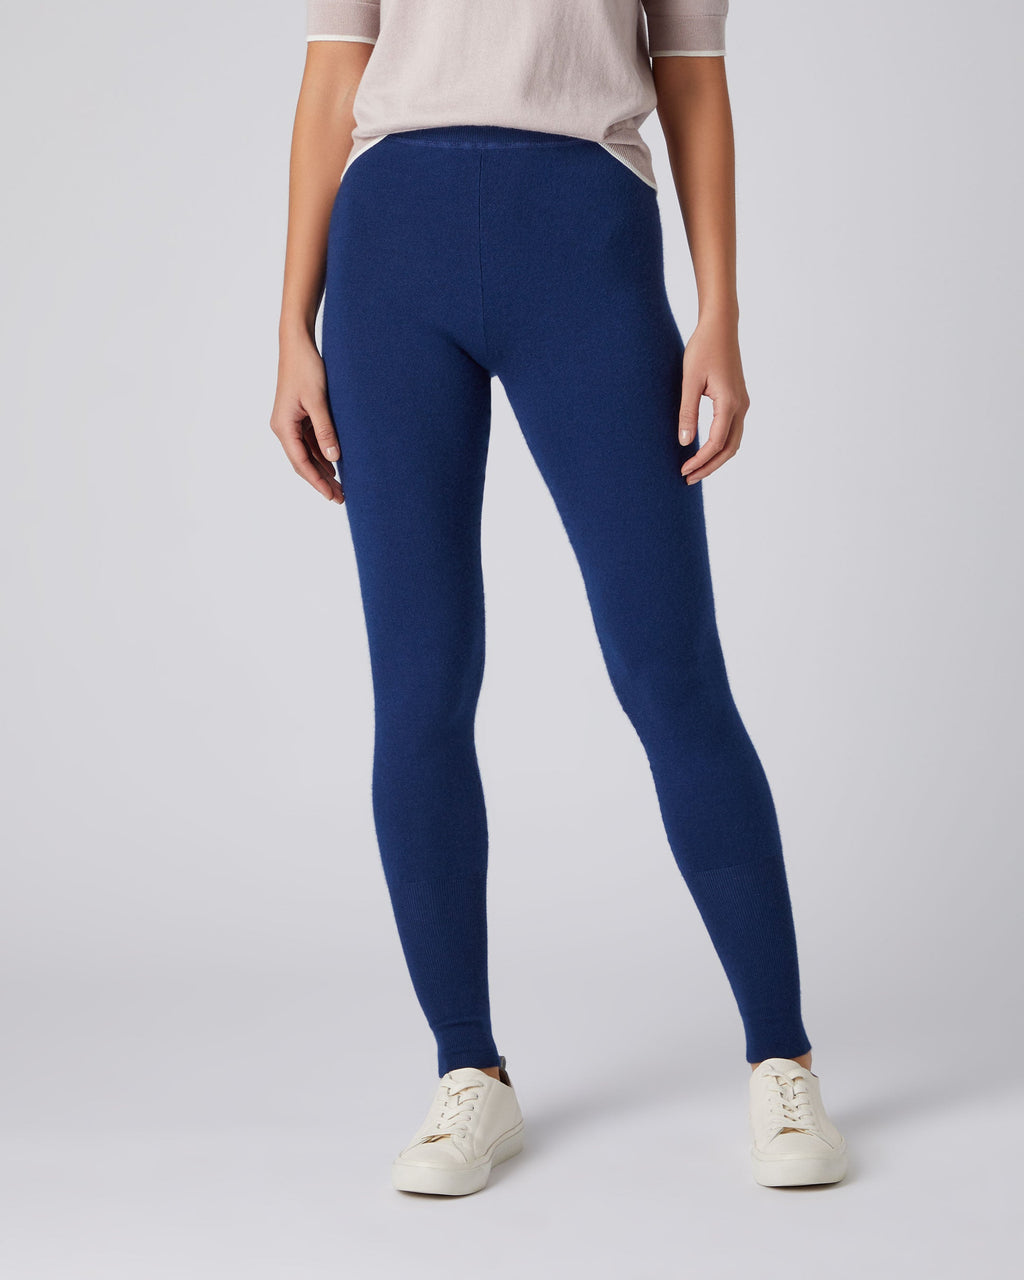 Women's Cashmere In Love Leggings from $150